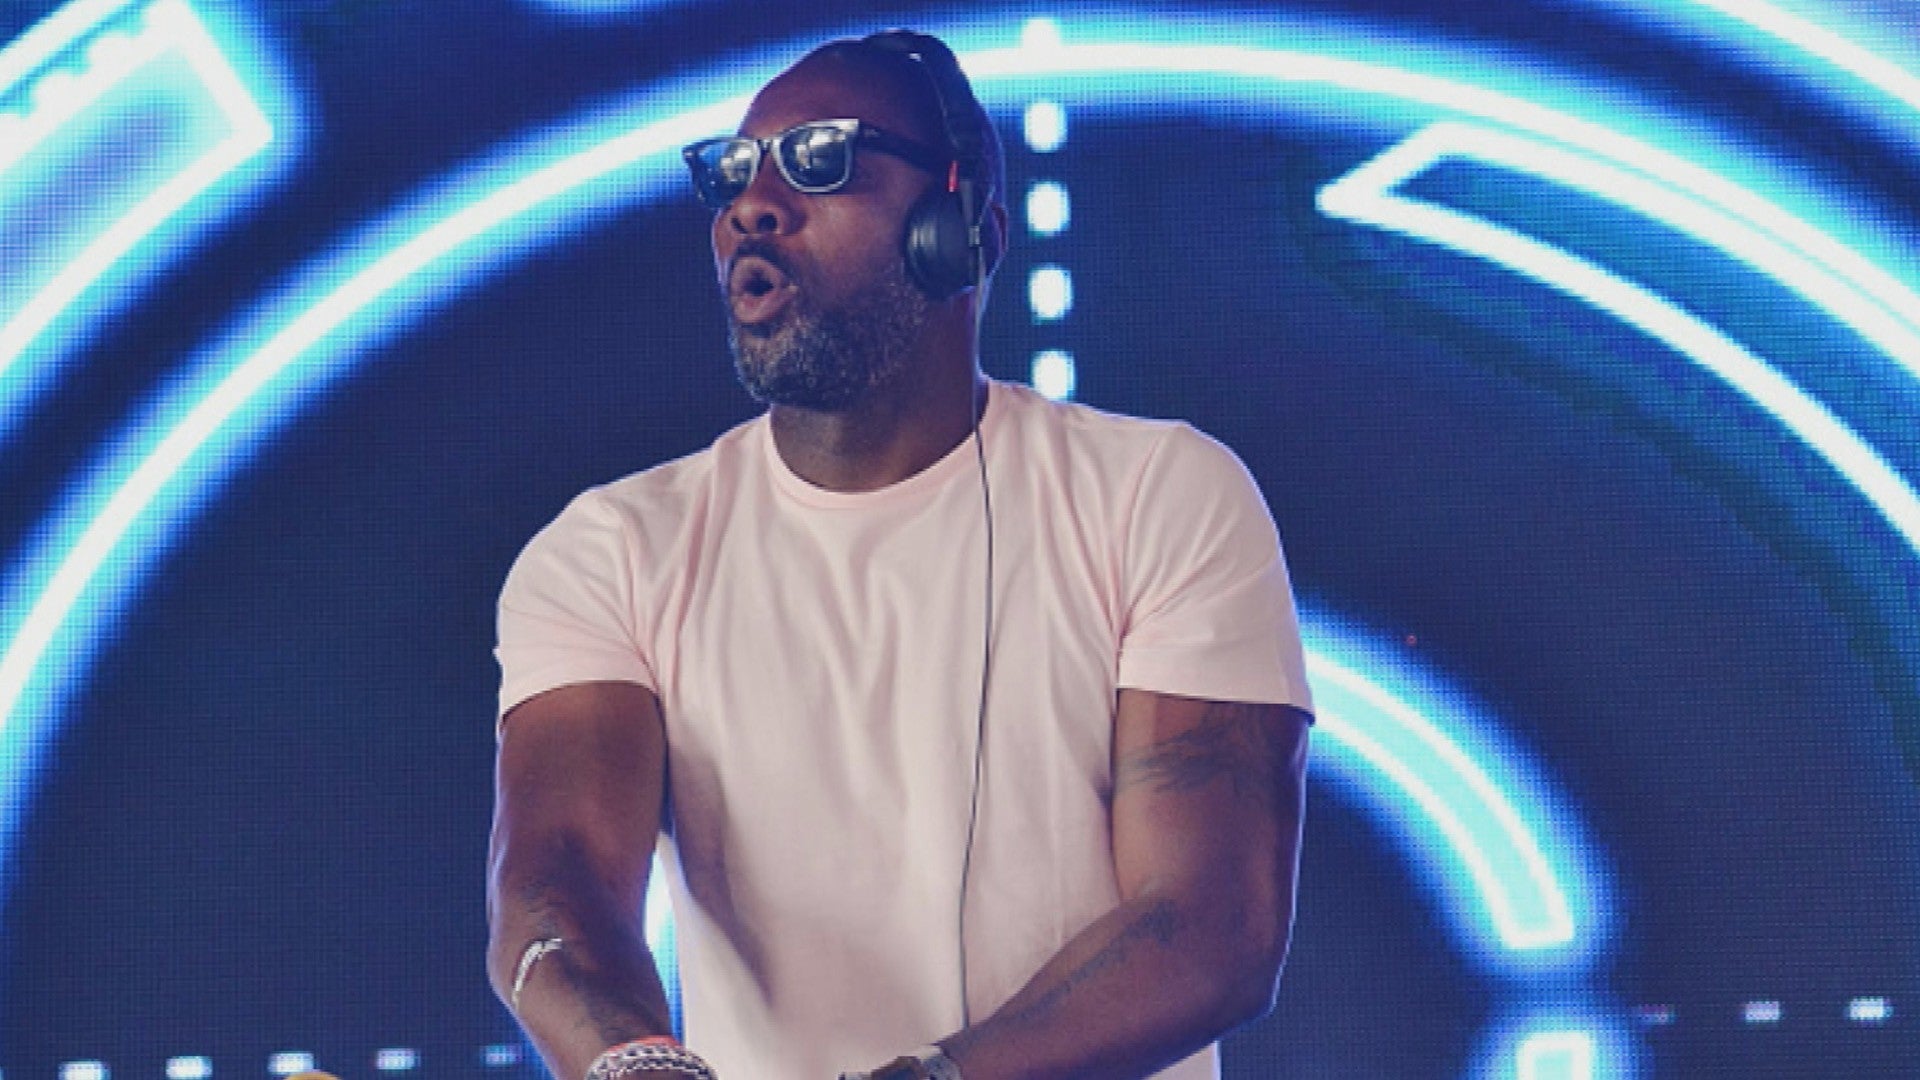 Idris Elba Is Playing Coachella, and People Didn't Know He Was a DJ